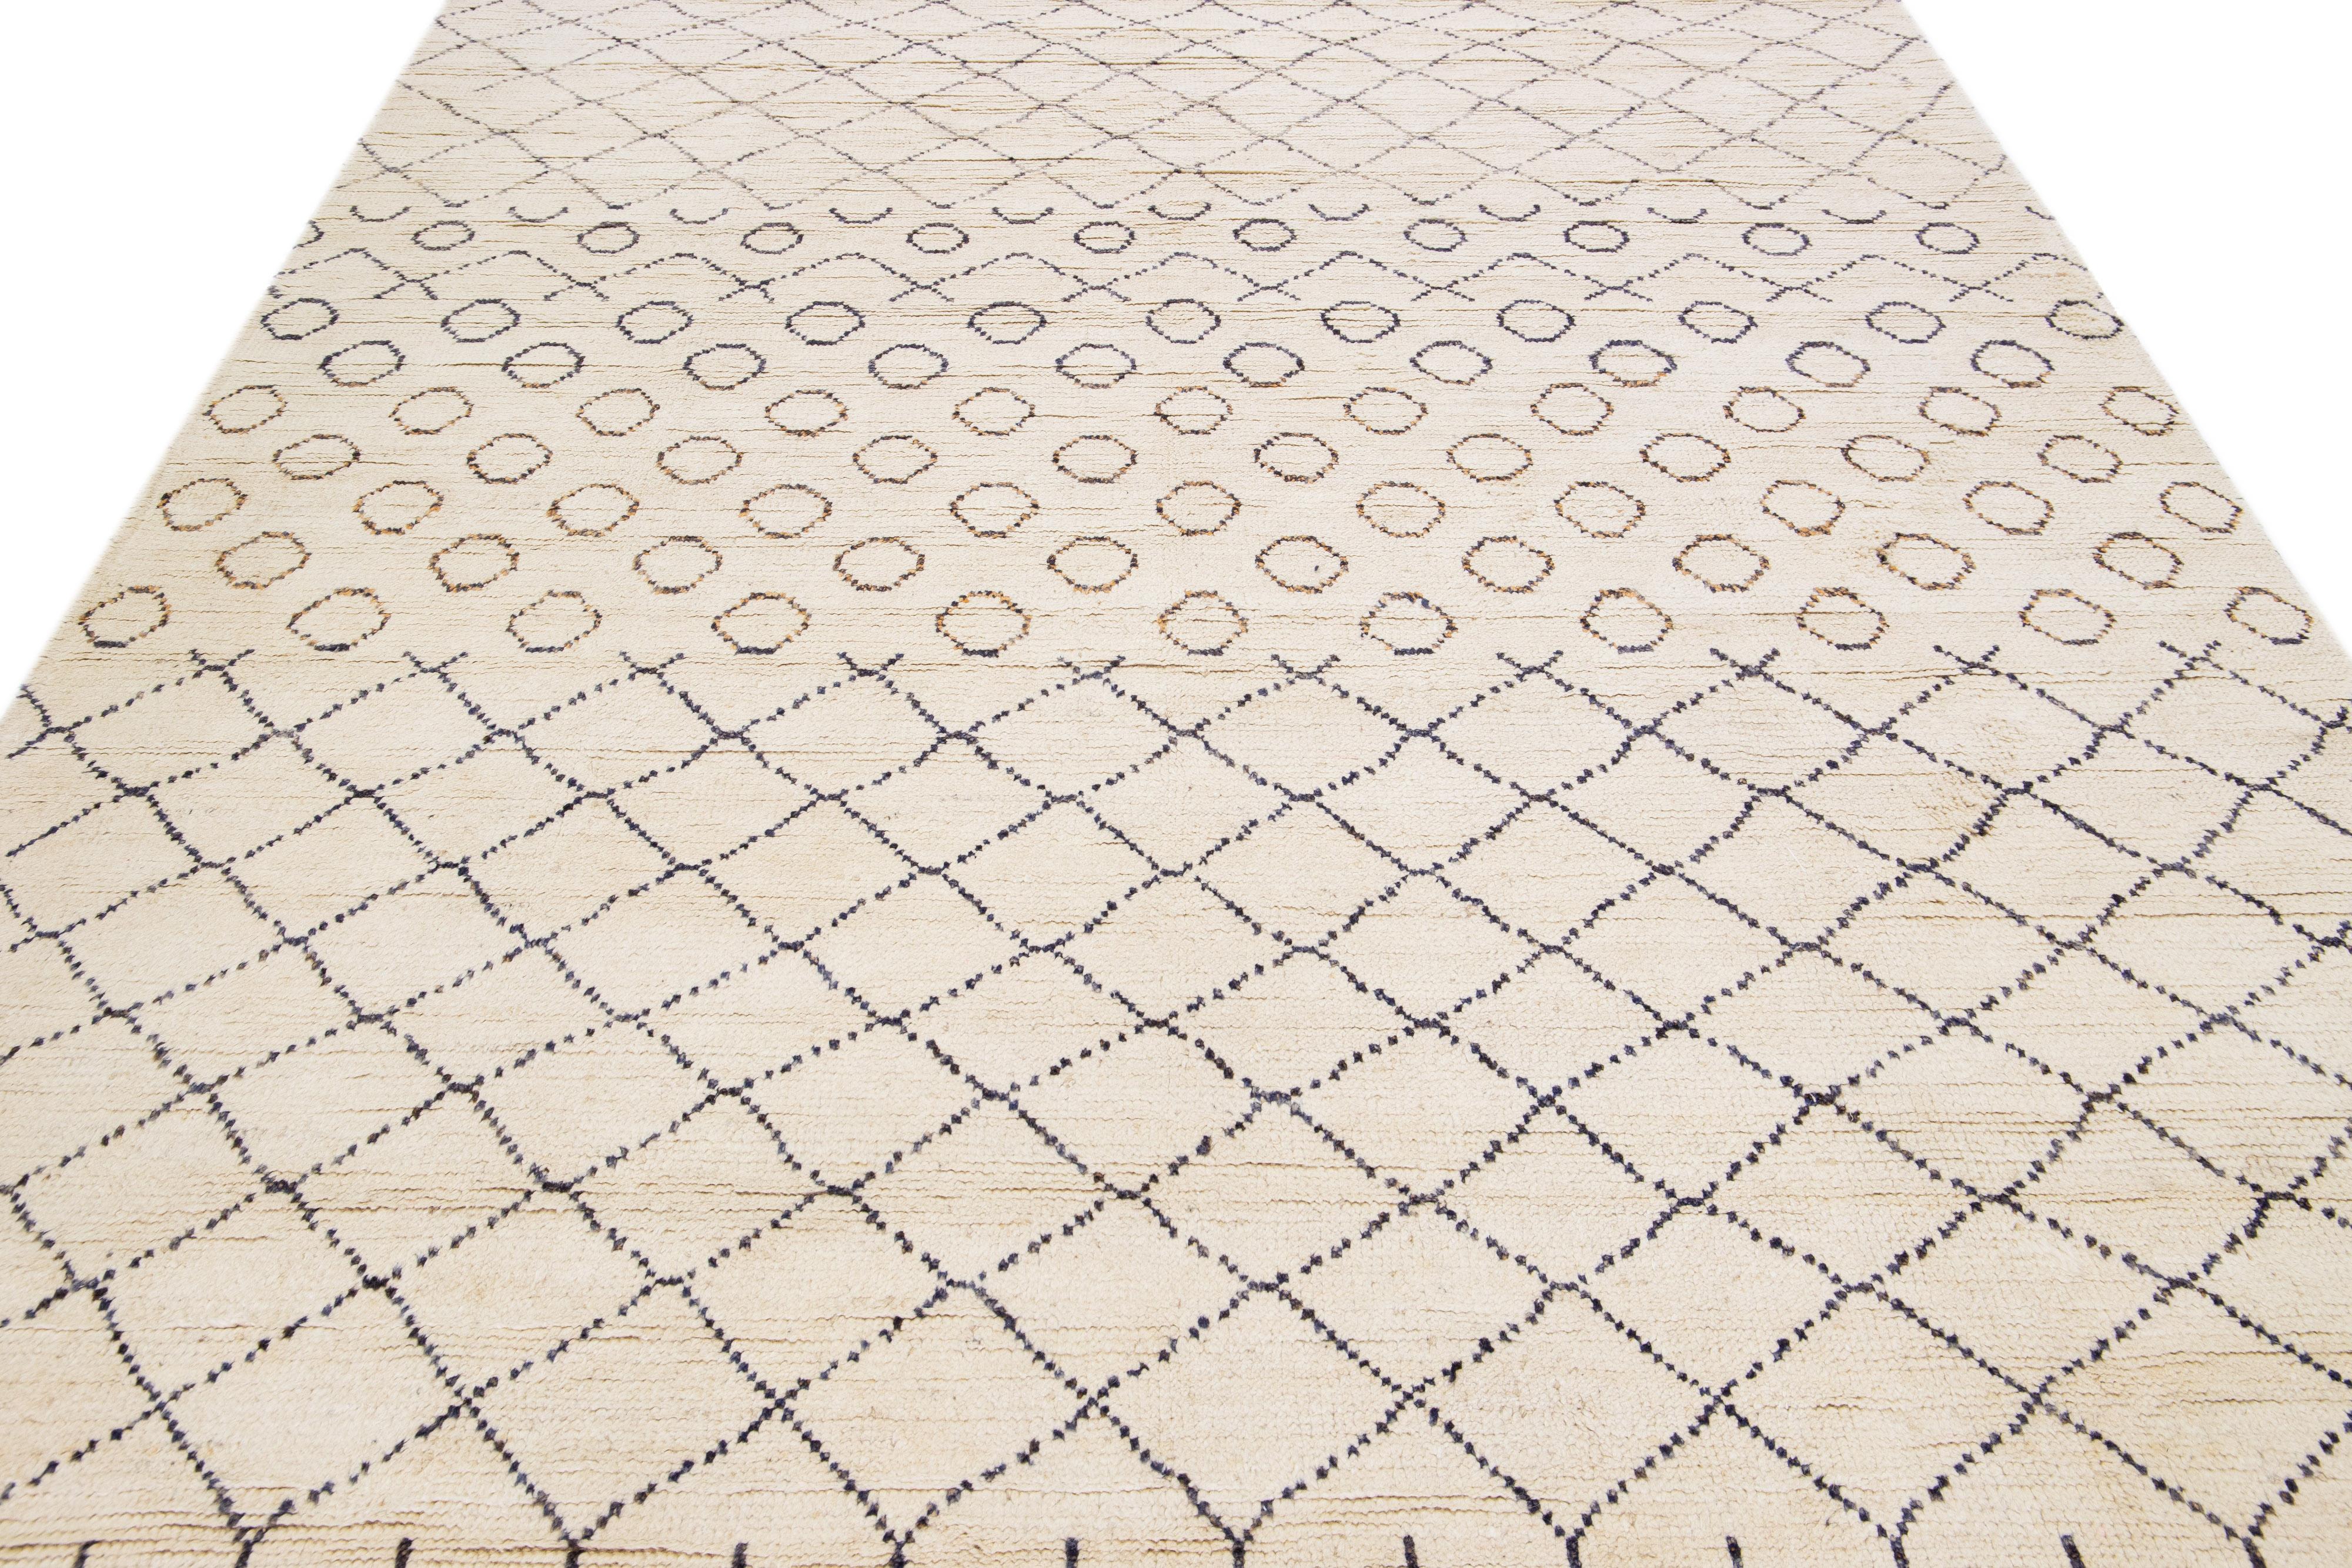 Beautiful modern Moroccan-style hand-knotted wool rug with an ivory field. This piece has orange and blue accent colors in a gorgeous geometric design with fringes on the top and bottom end.

This rug measures: 8'1